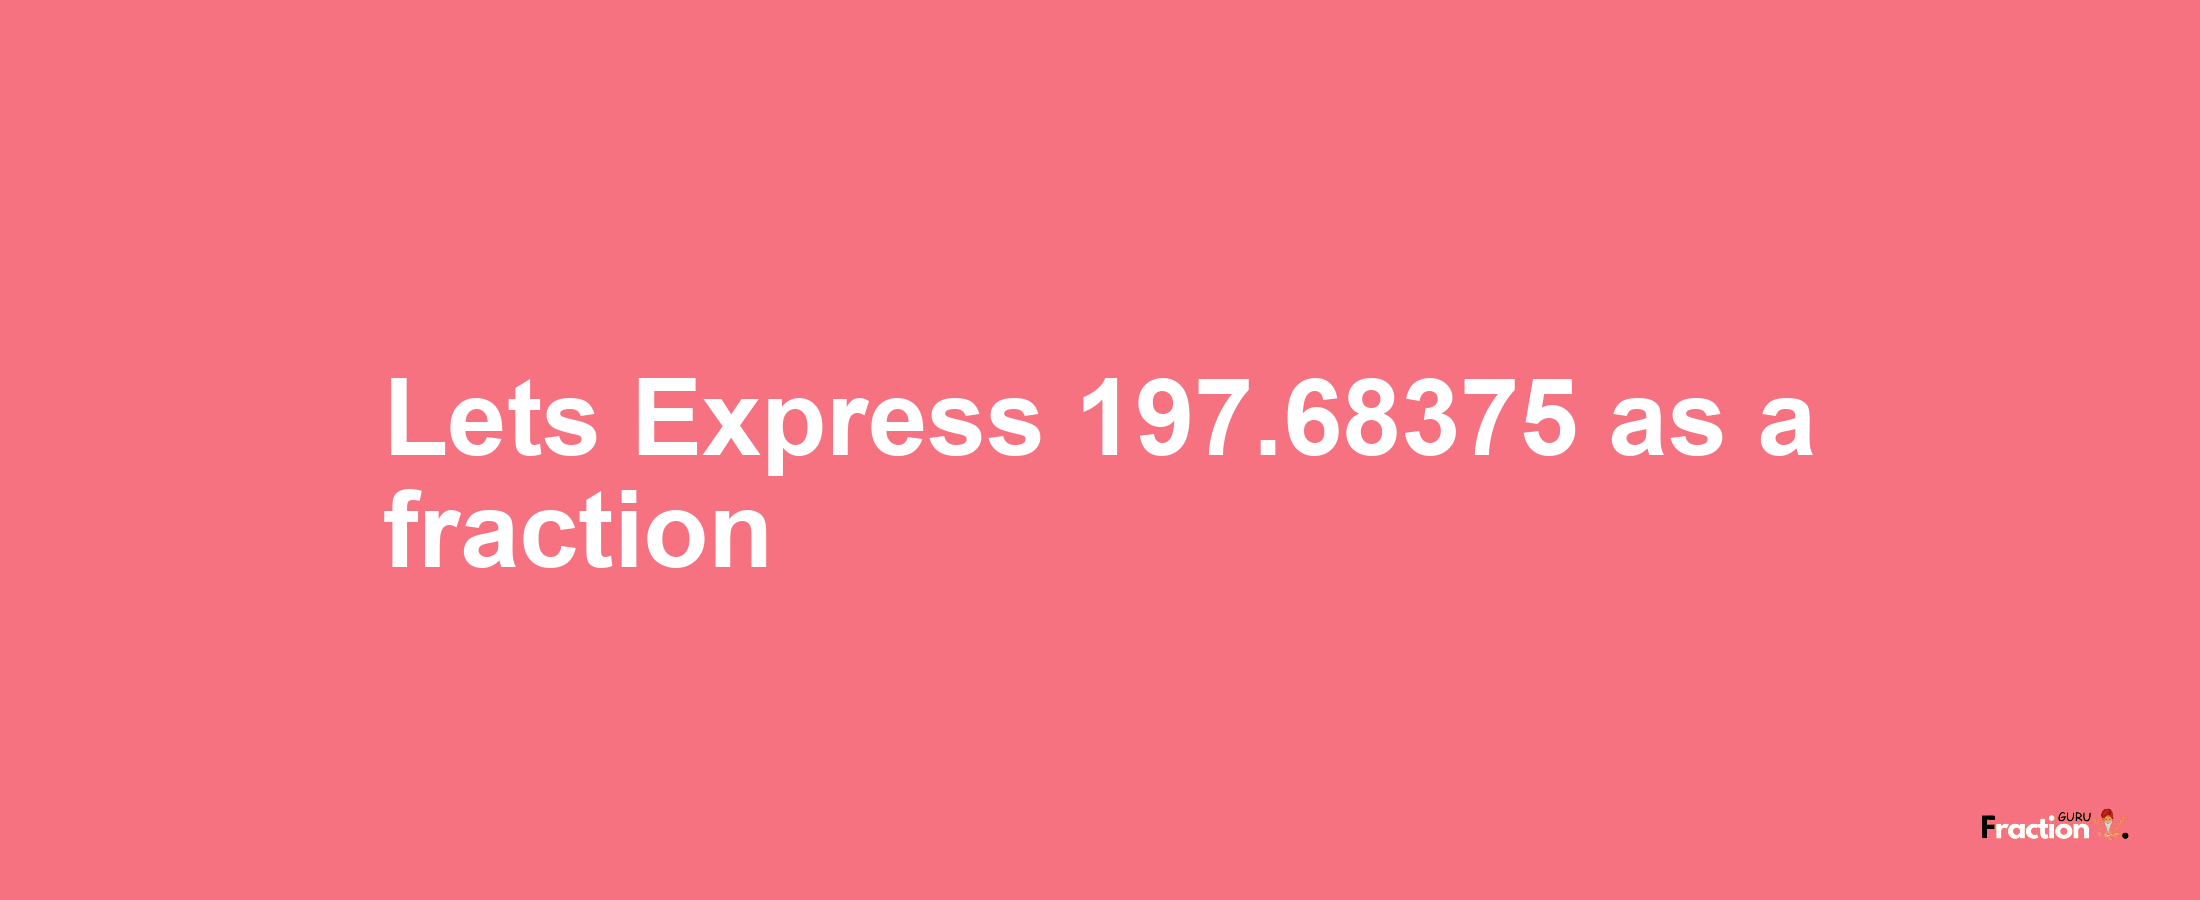 Lets Express 197.68375 as afraction